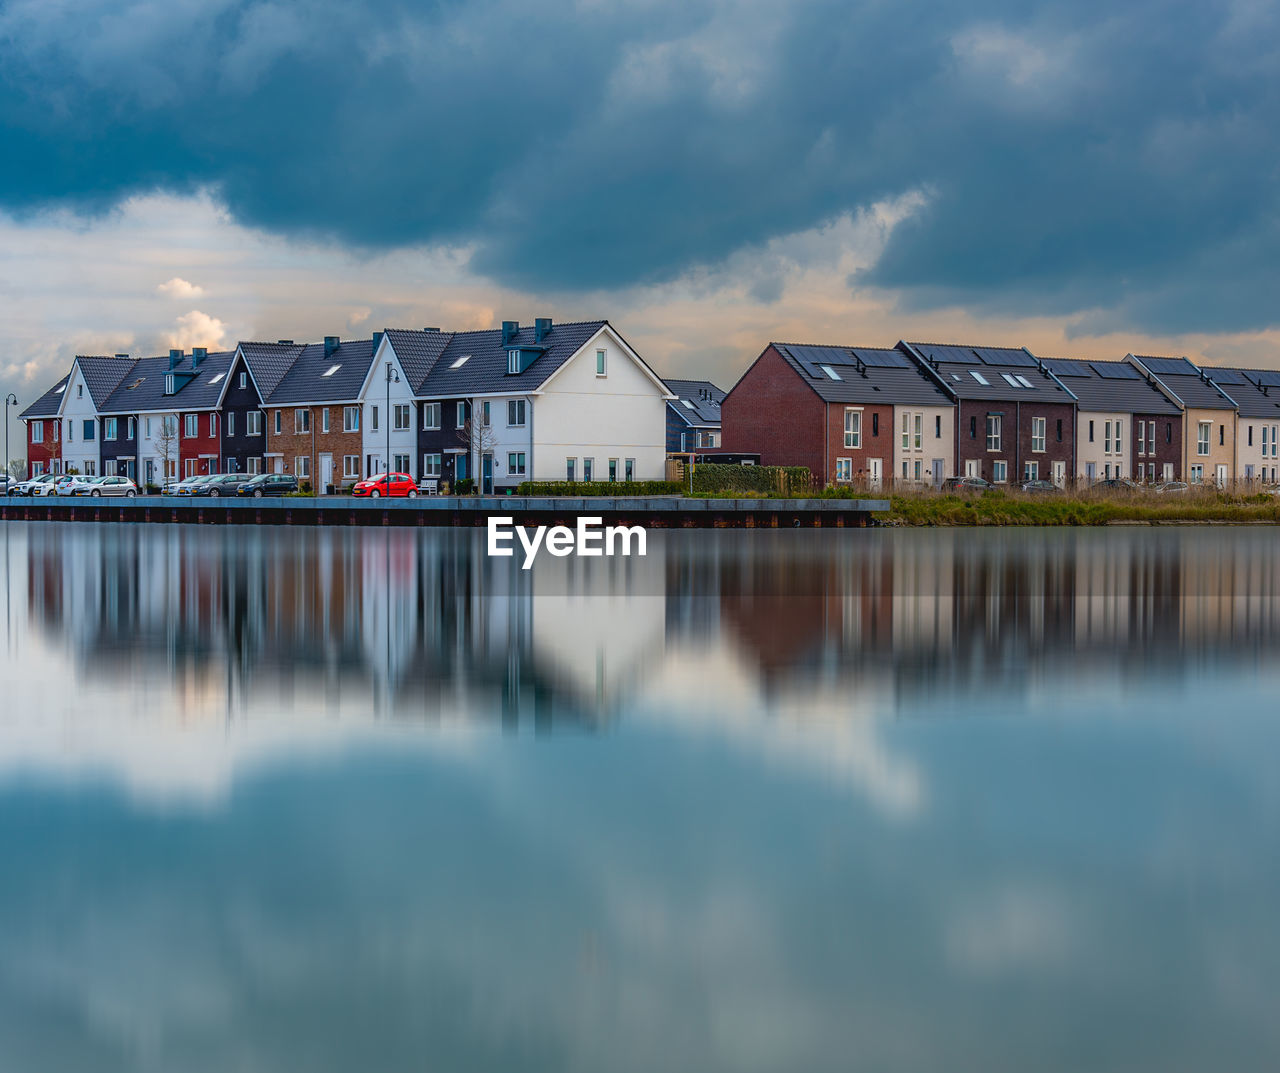 Houses by lake against cloudy sky in city